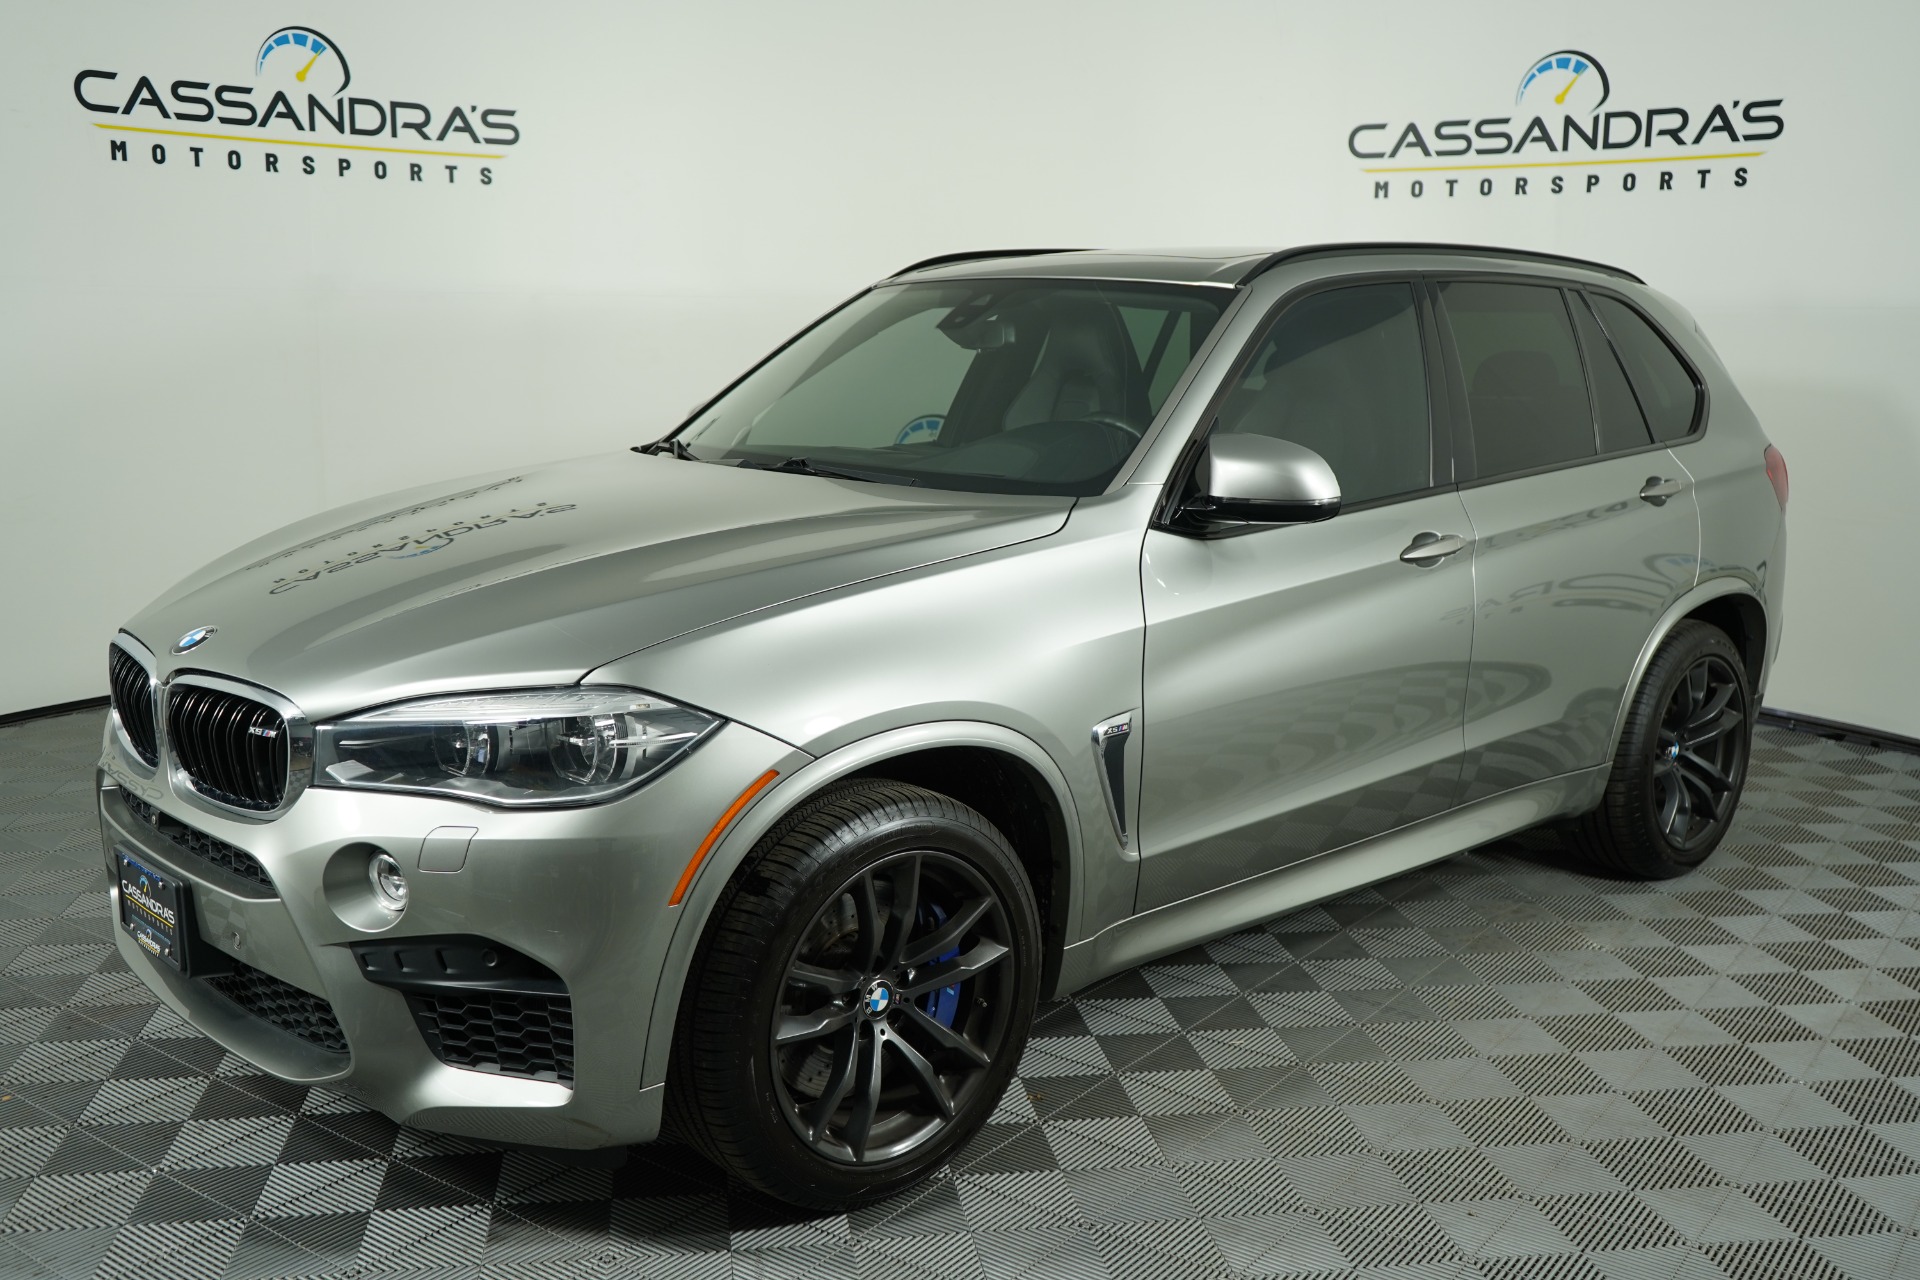 Used 2016 BMW X5 M For Sale (Sold) Cassandra Motorsports Stock #10204